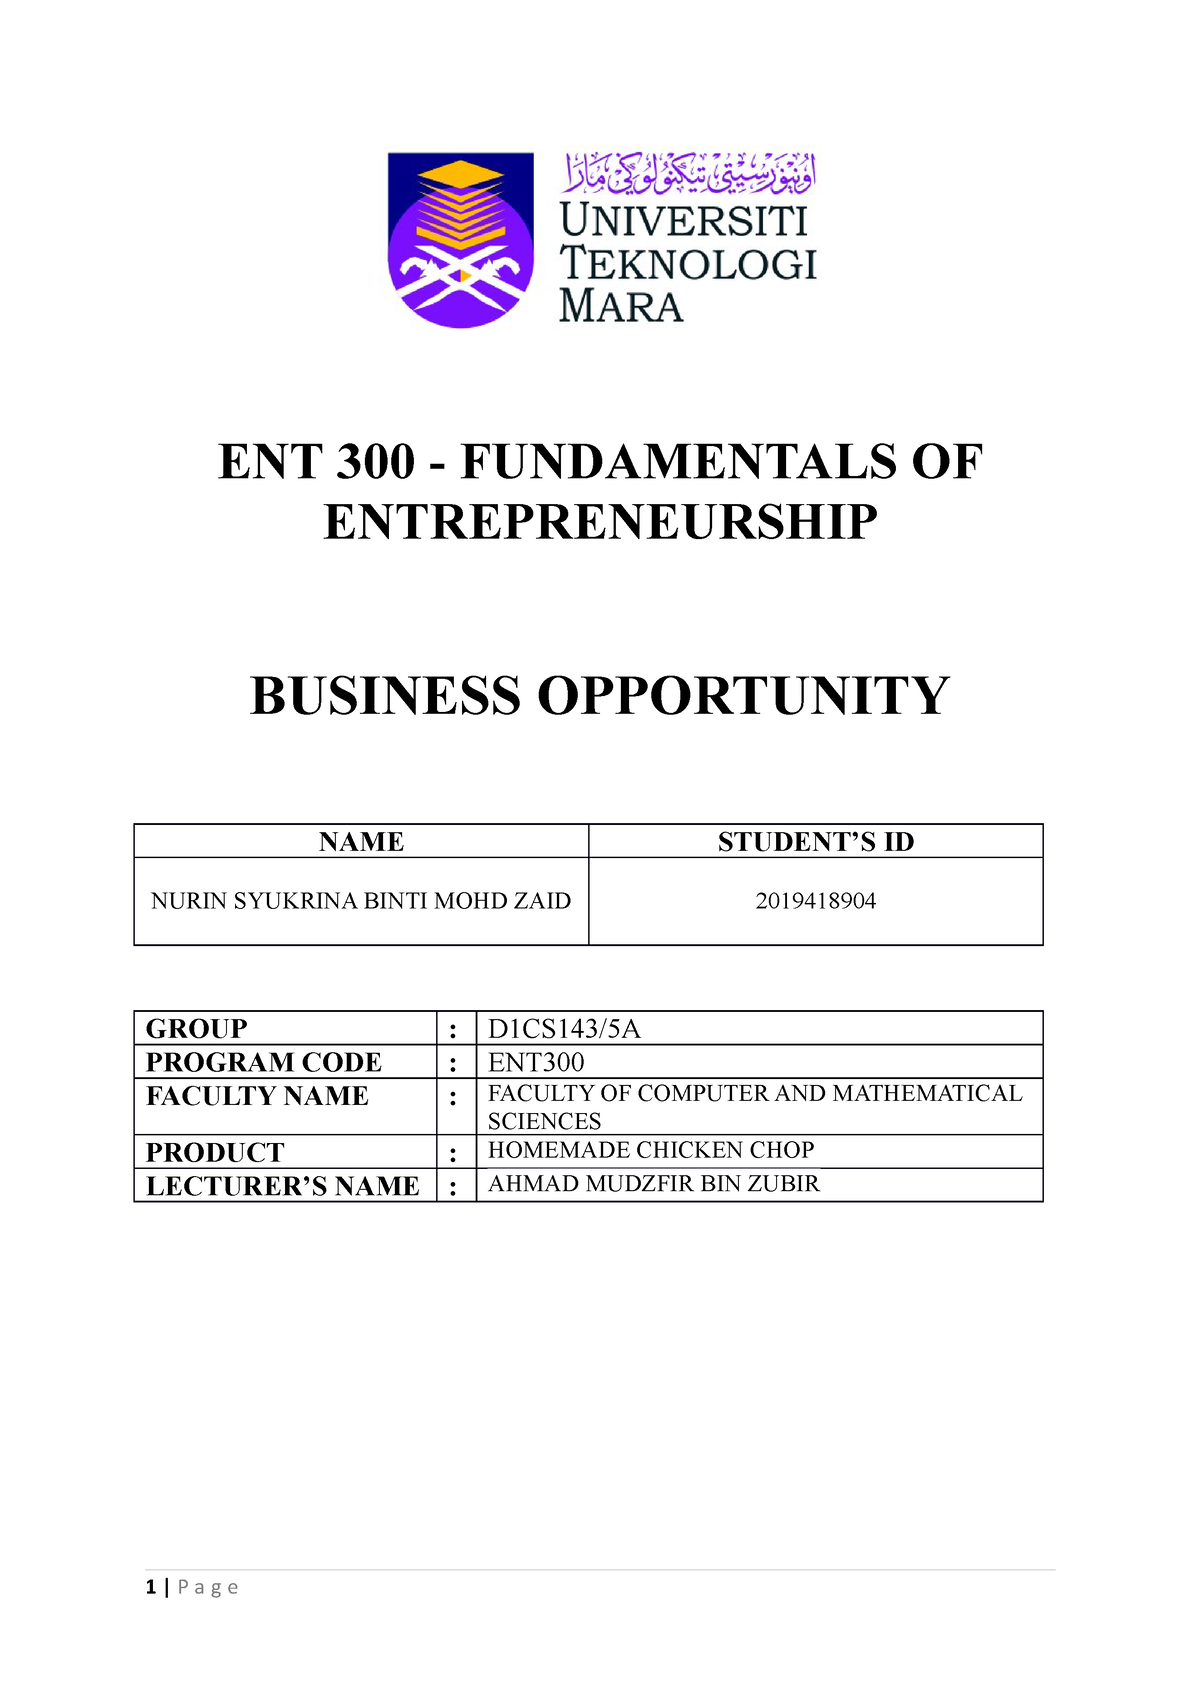 business opportunity ent300 individual assignment